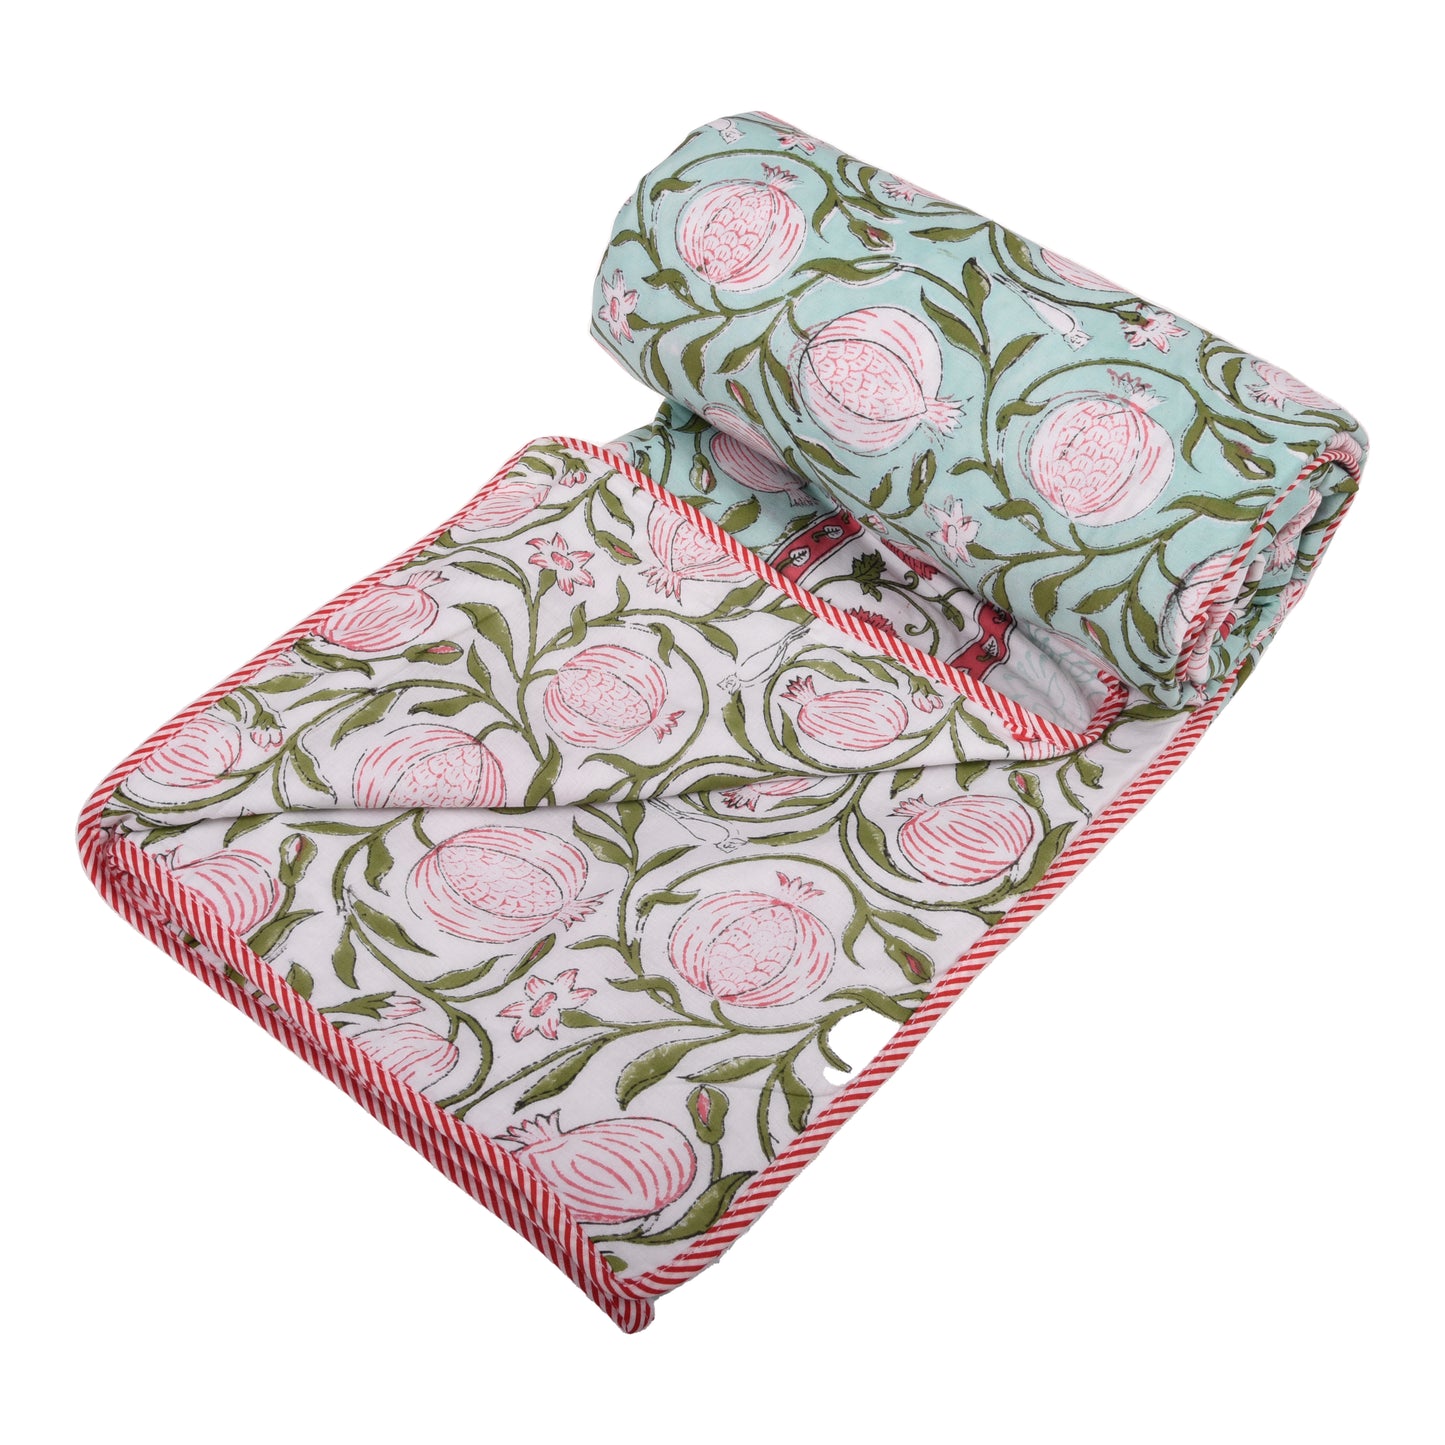 Cotton Blanket - Single Dohar ( 60 x 90 Inches) Red Green Anar